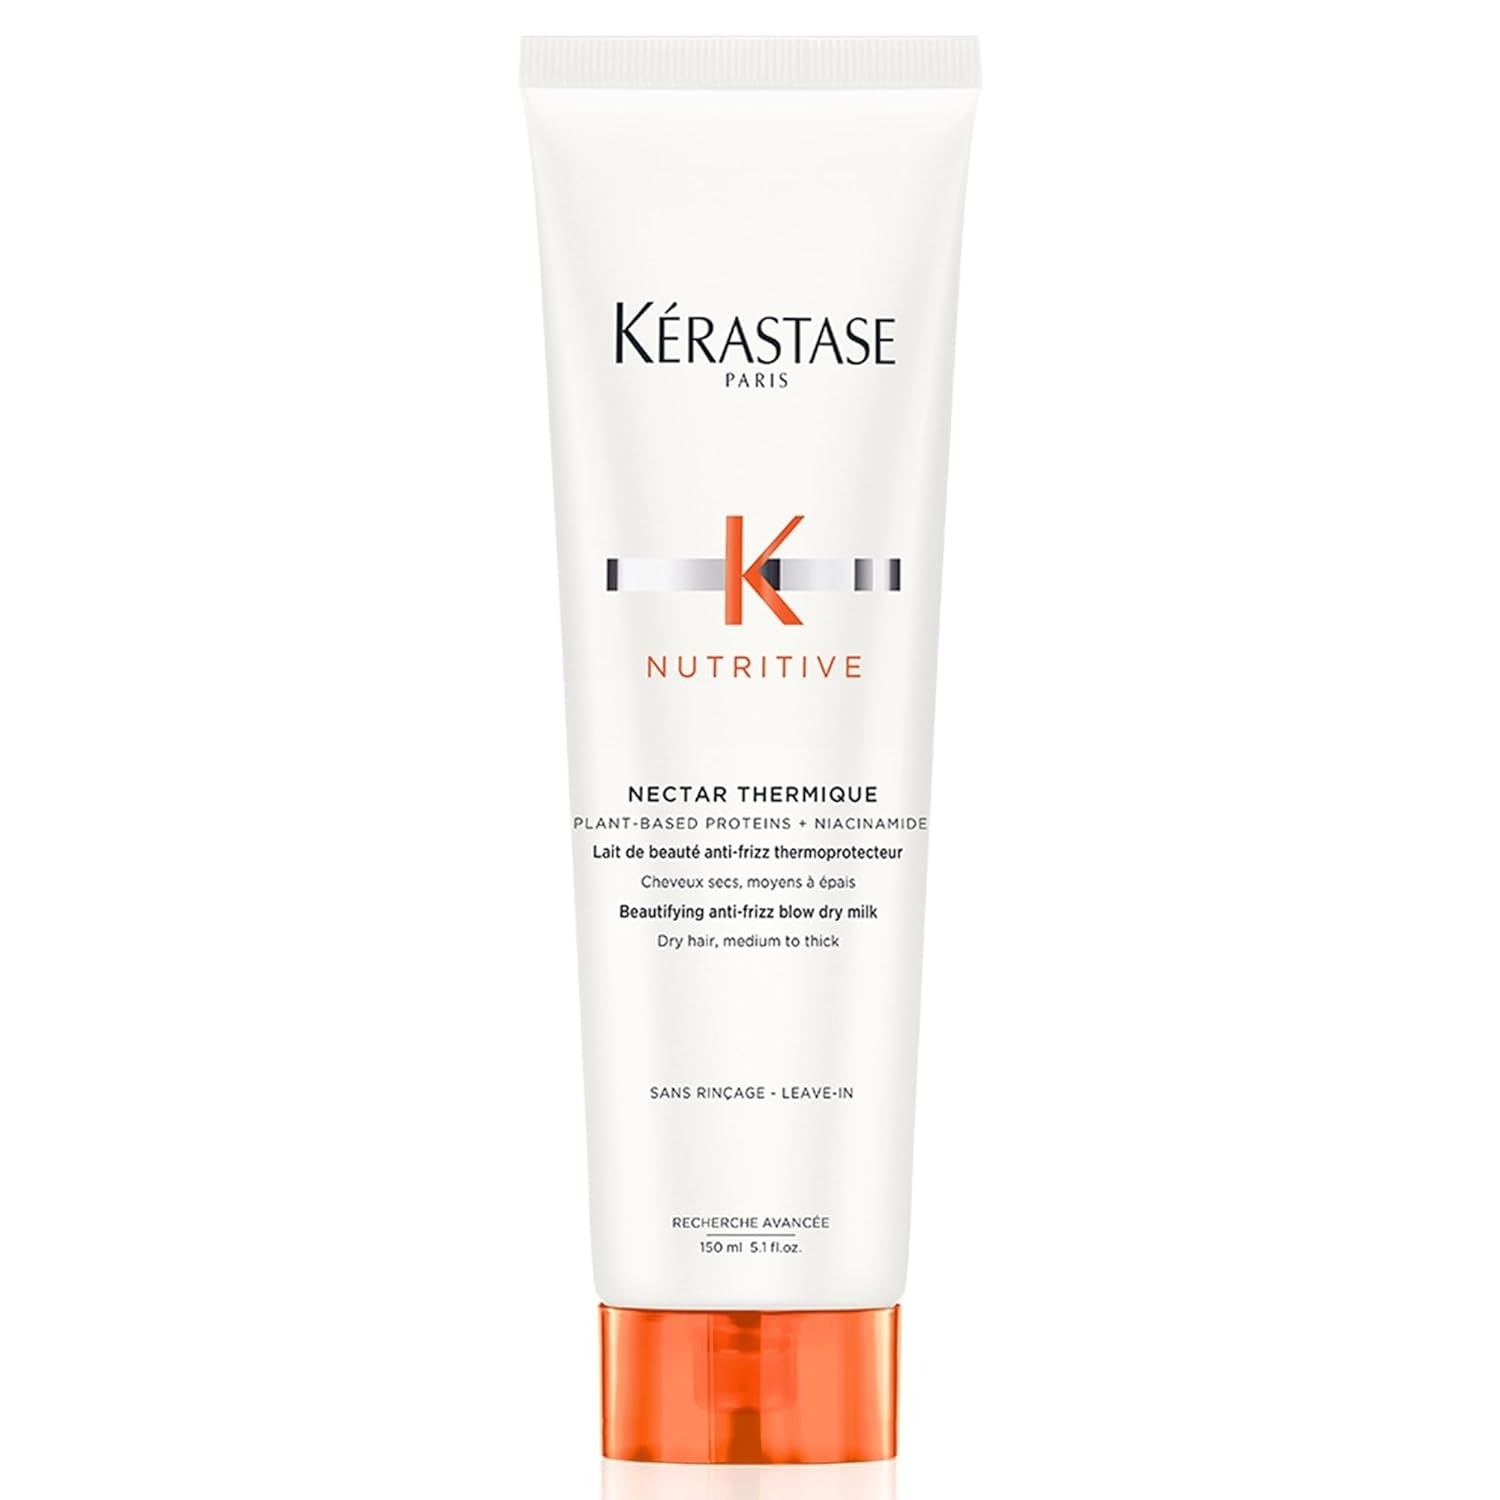 Kerastase Nutritive Nectar Thermique leave-in hair conditioner tube on a plain background